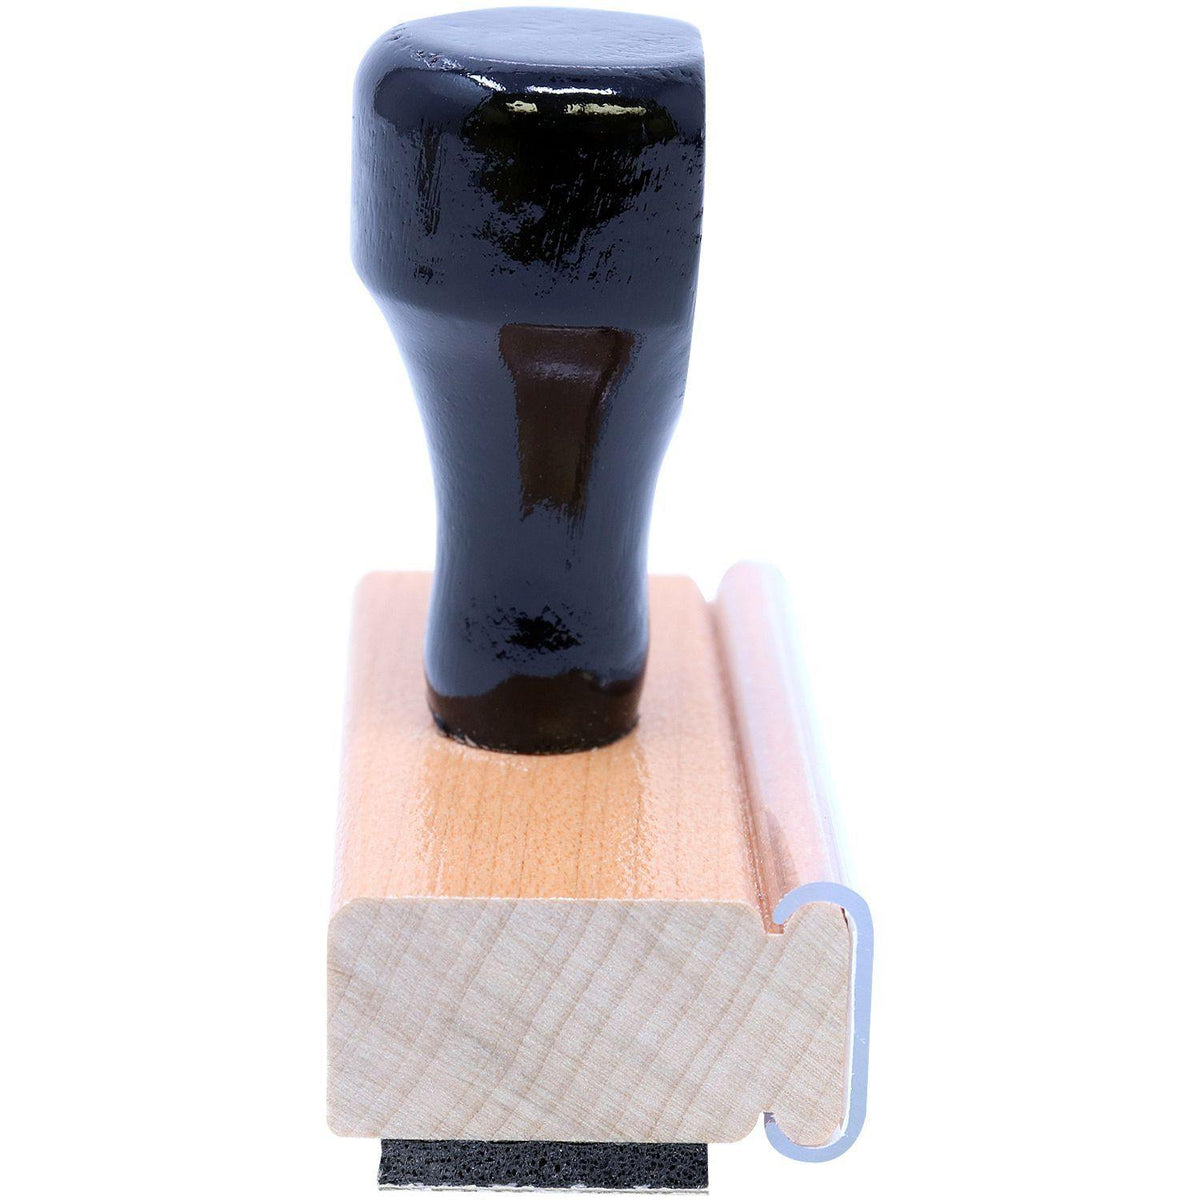 Letter Post Economy Rubber Stamp - Engineer Seal Stamps - Brand_Acorn, Impression Size_Small, Stamp Type_Regular Stamp, Type of Use_General, Type of Use_Office, Type of Use_Postal &amp; Mailing